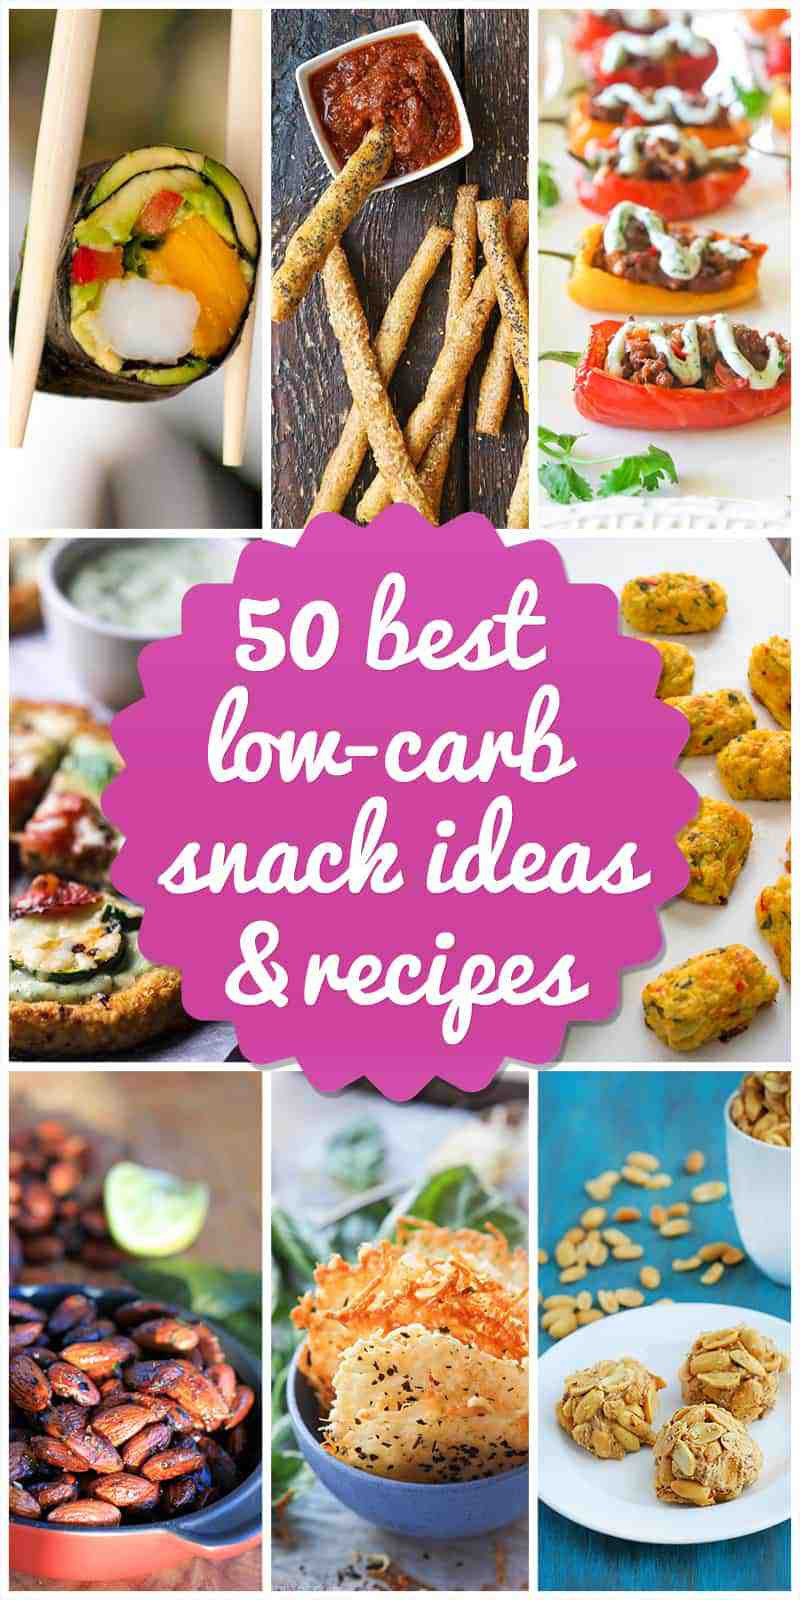 Healthy Snacks Low Carb
 50 Low Carb Snack Ideas and Recipes for 2018